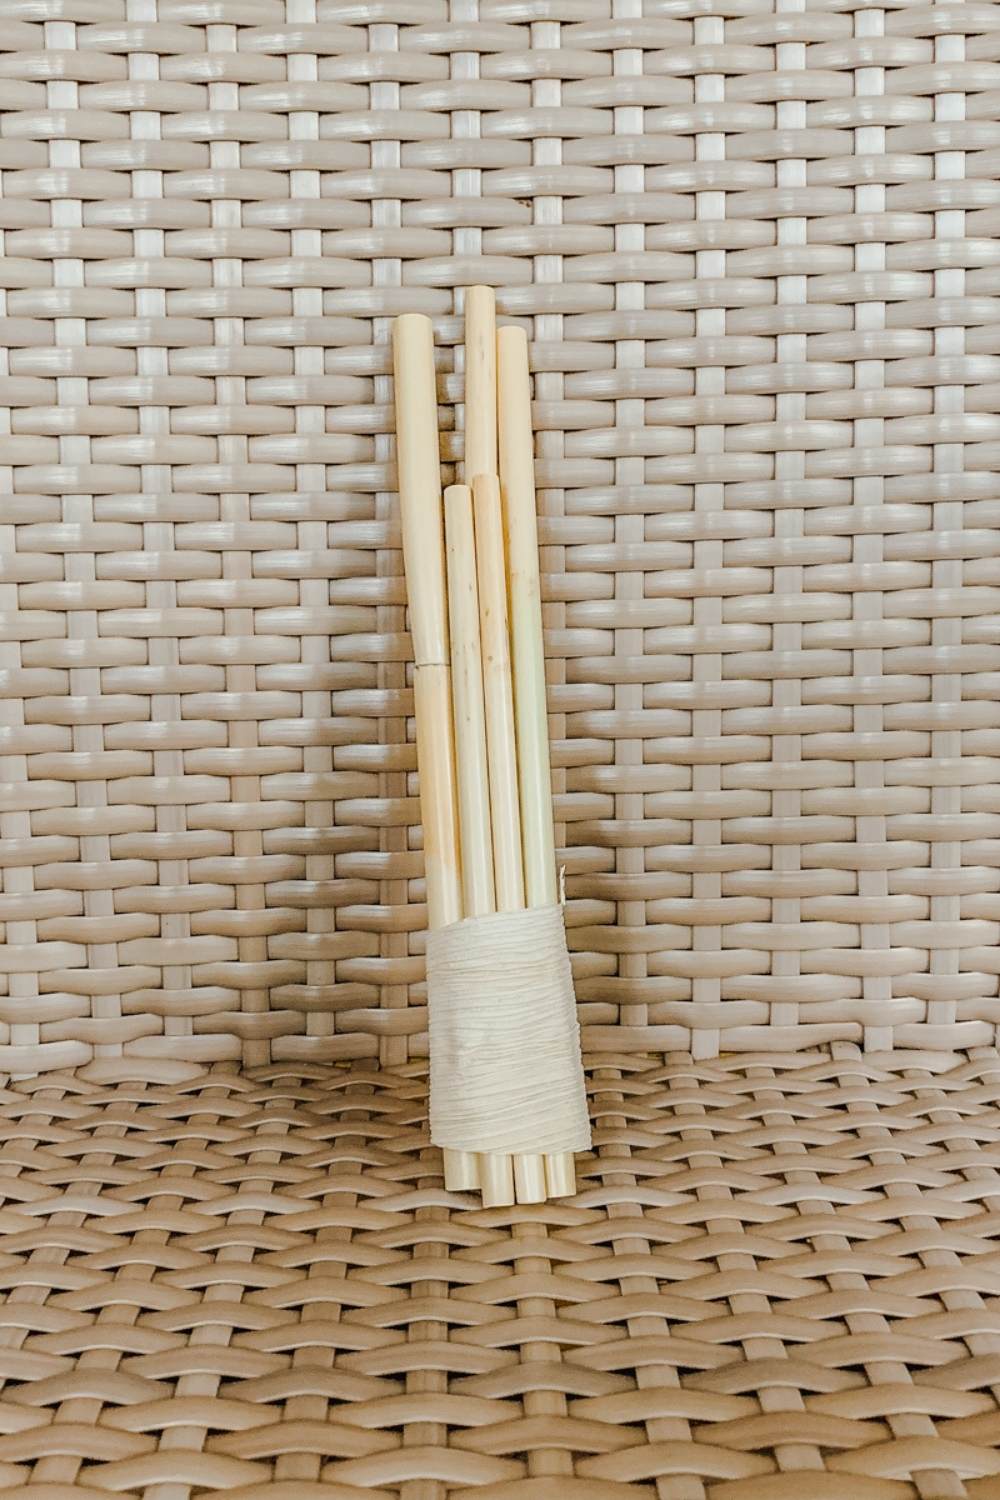 Artisan & Fox - Home Goods - CARRIZO Handmade Drinking Straws - Handcrafted in Mexico 